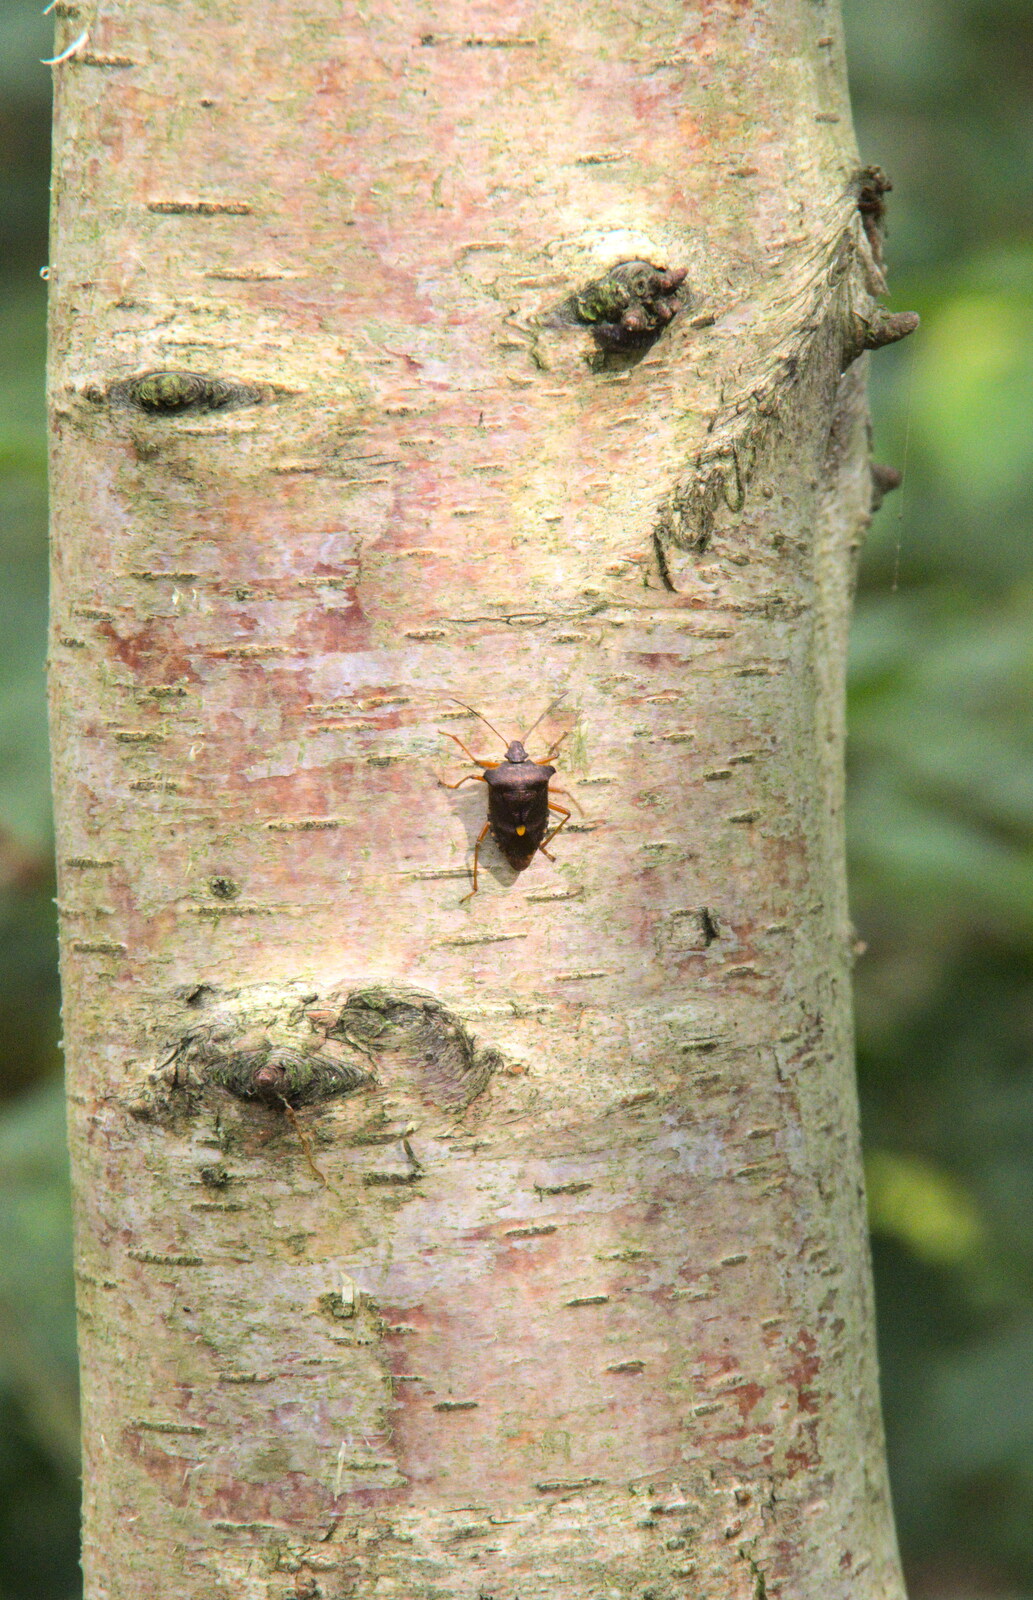 A shield beetle climbs up a silver birch from Jules Visits, and a Trip to Tyrrel's Wood, Pulham Market, Norfolk - 16th August 2020